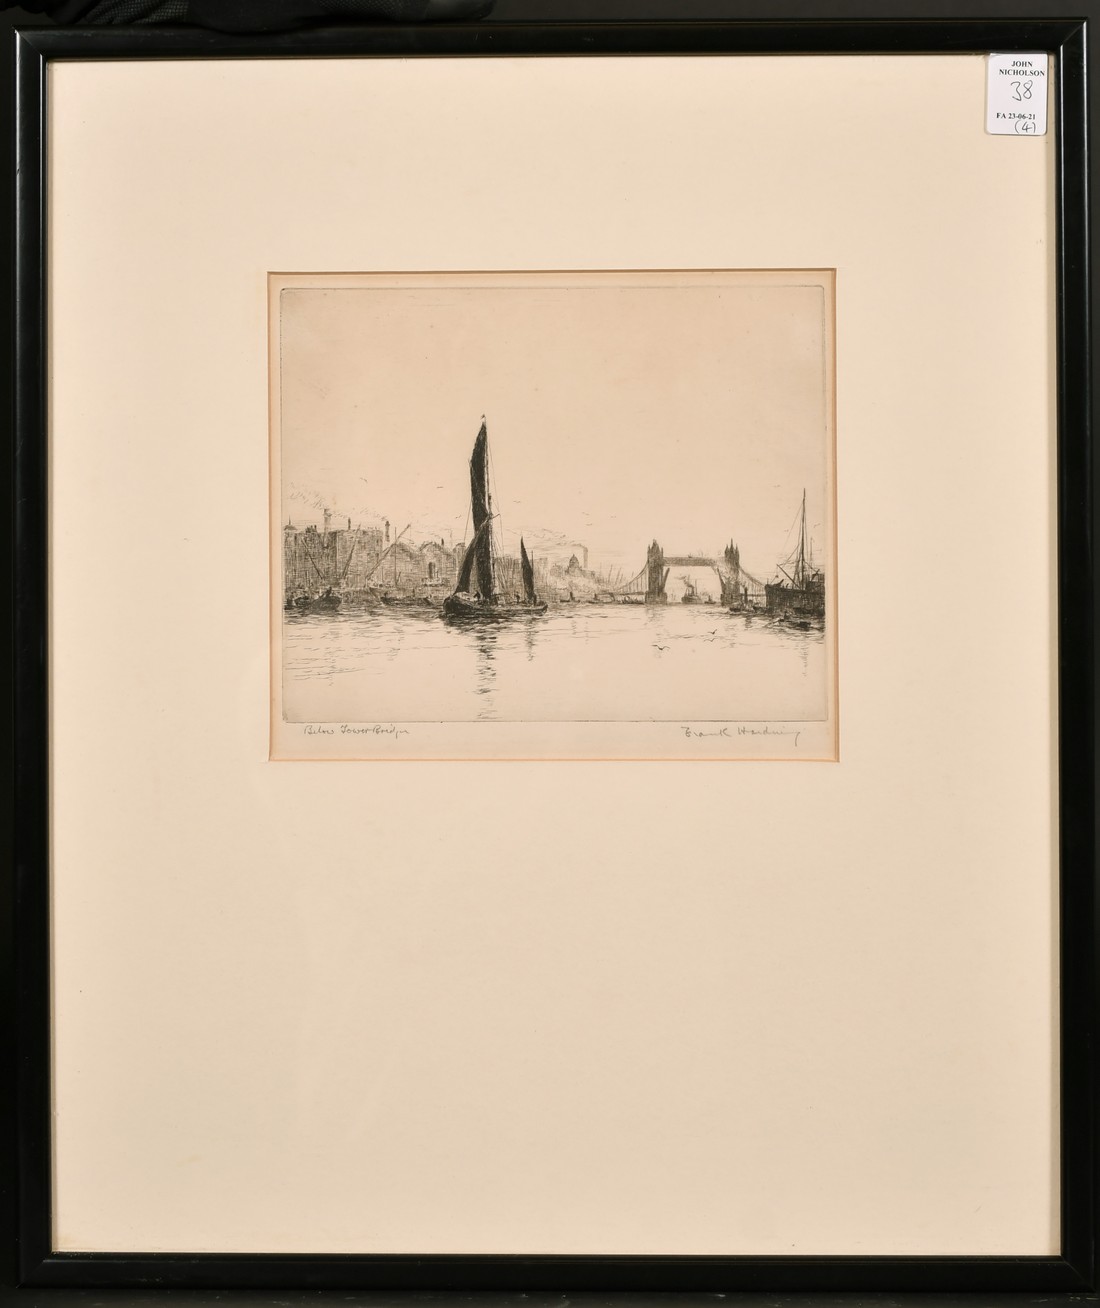 Frank Harding (19th /20th century) 'Waterloo Bridge', Etching, signed and inscribed in pencil, 6" - Image 4 of 9